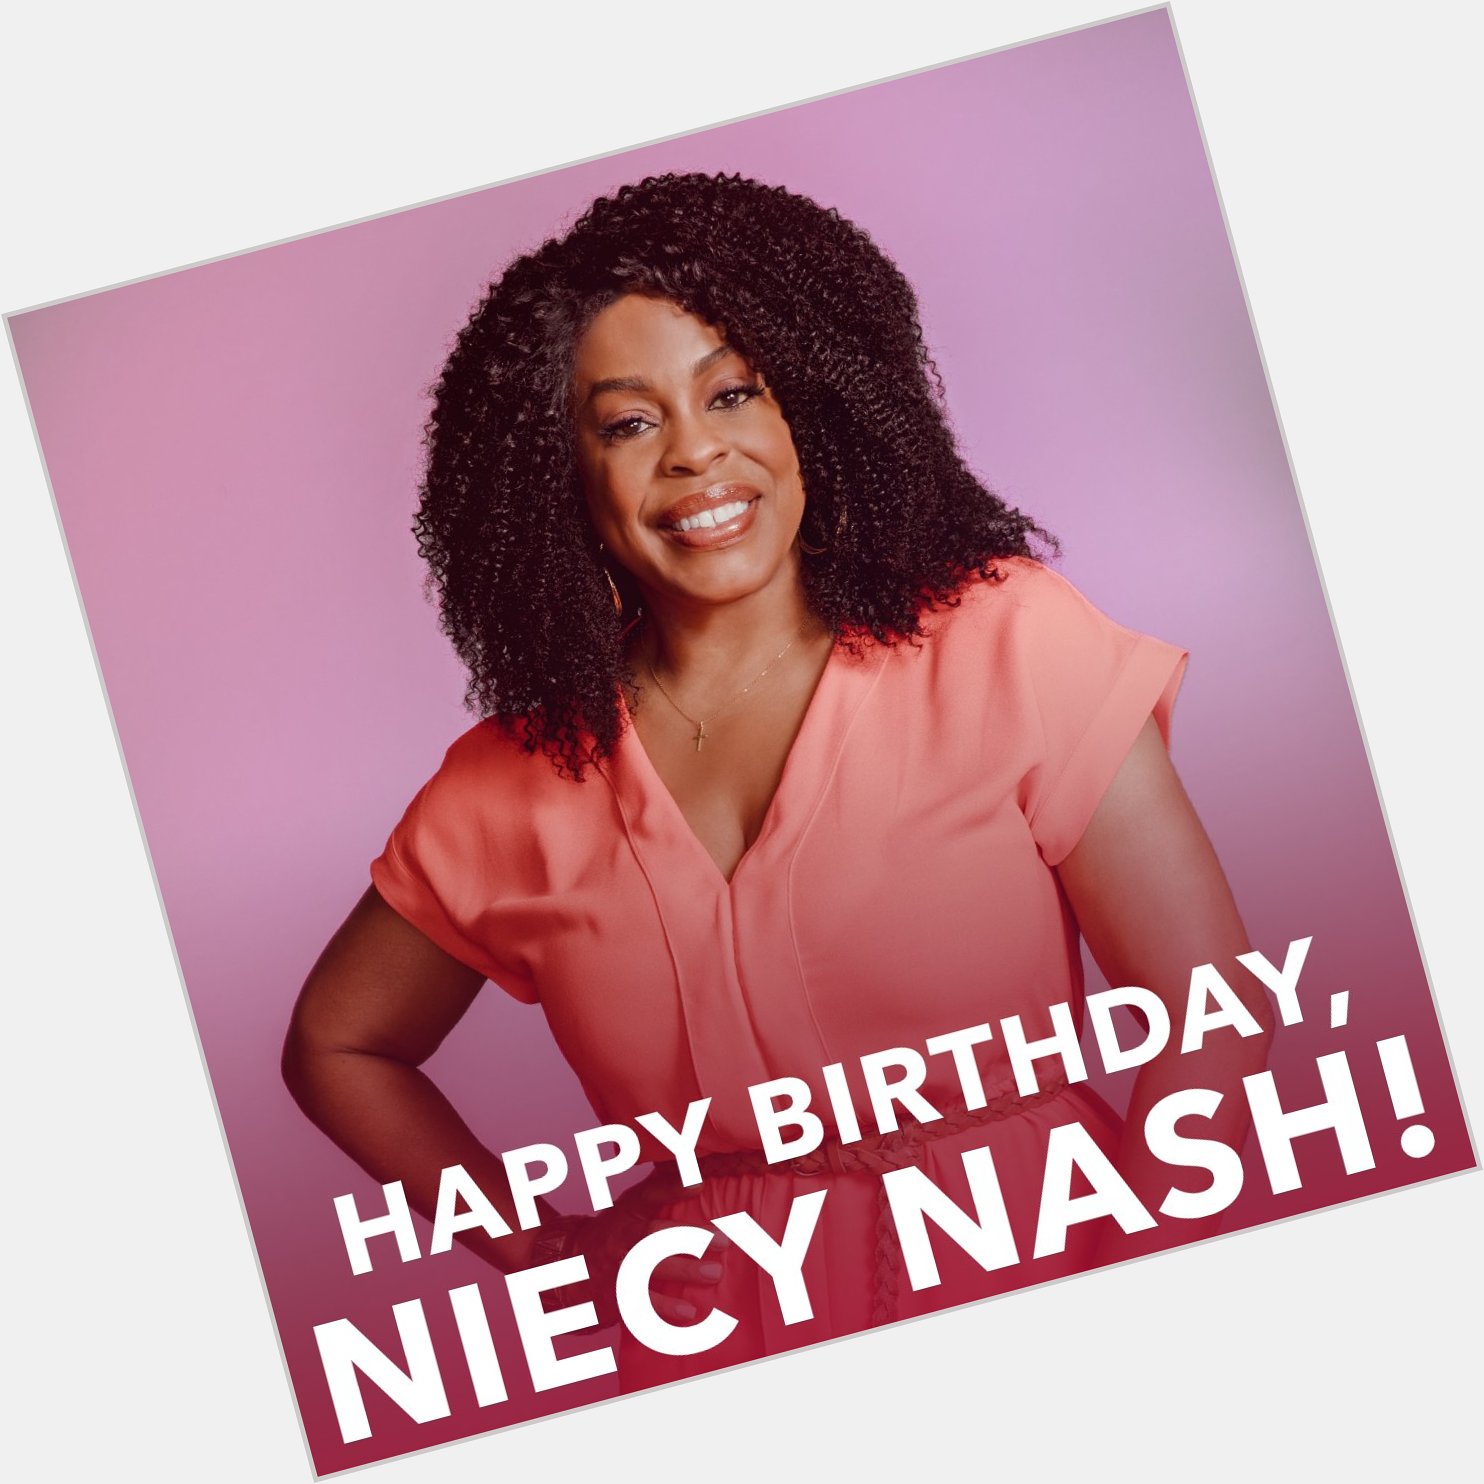 Wishing Niecy Nash a very special and happy birthday! 